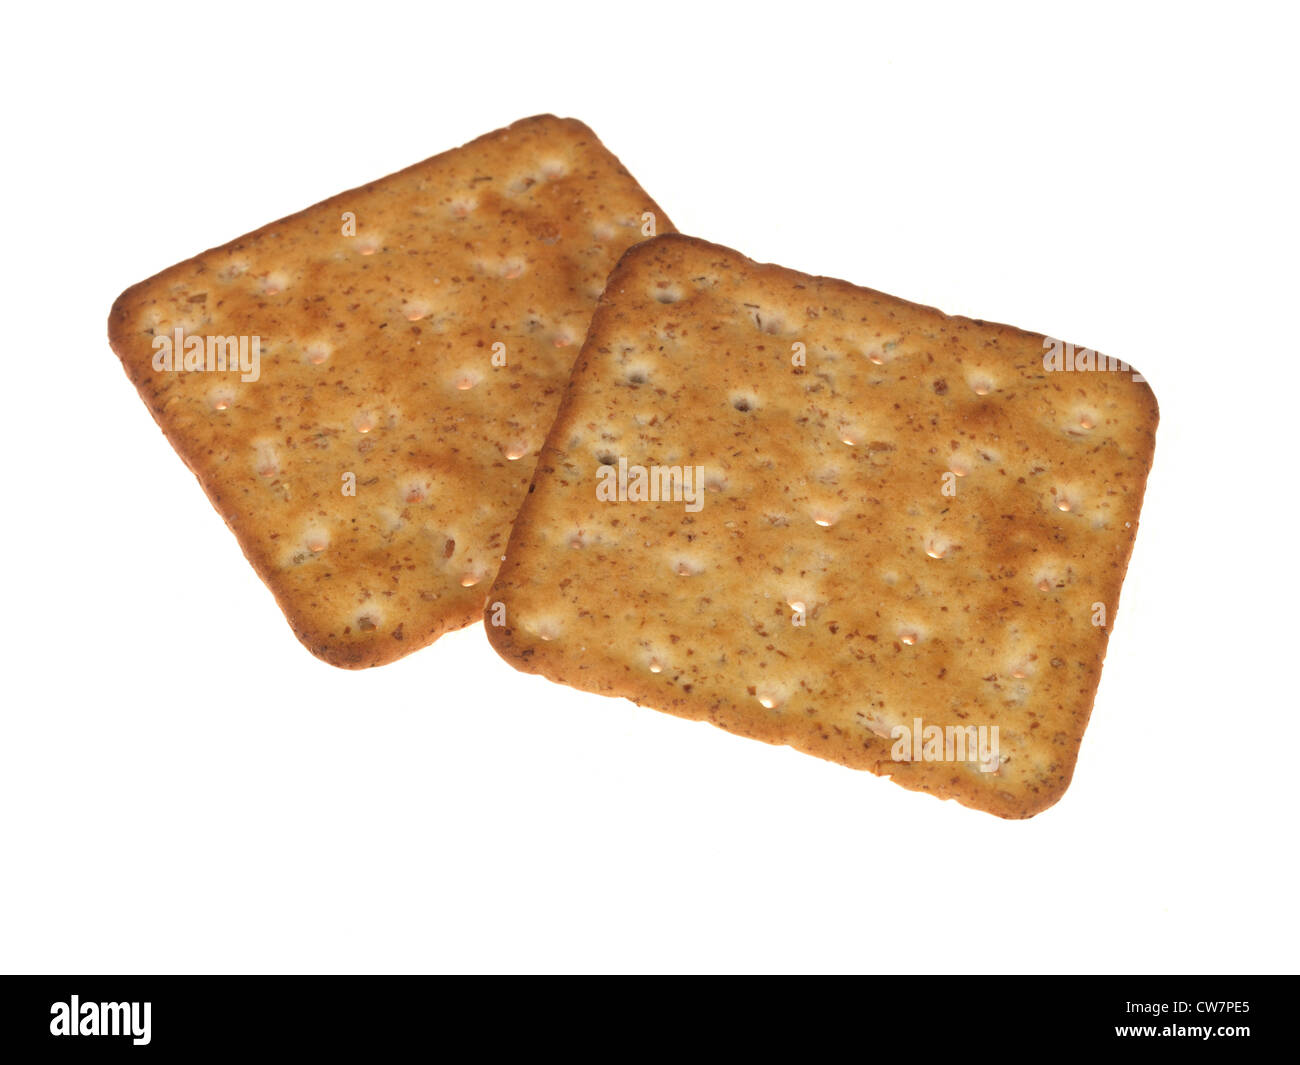 Savoury Multigrain Crackers or Biscuits Usually Eaten With A Selection Of Cheese Isolated Against a White Background With No People Stock Photo